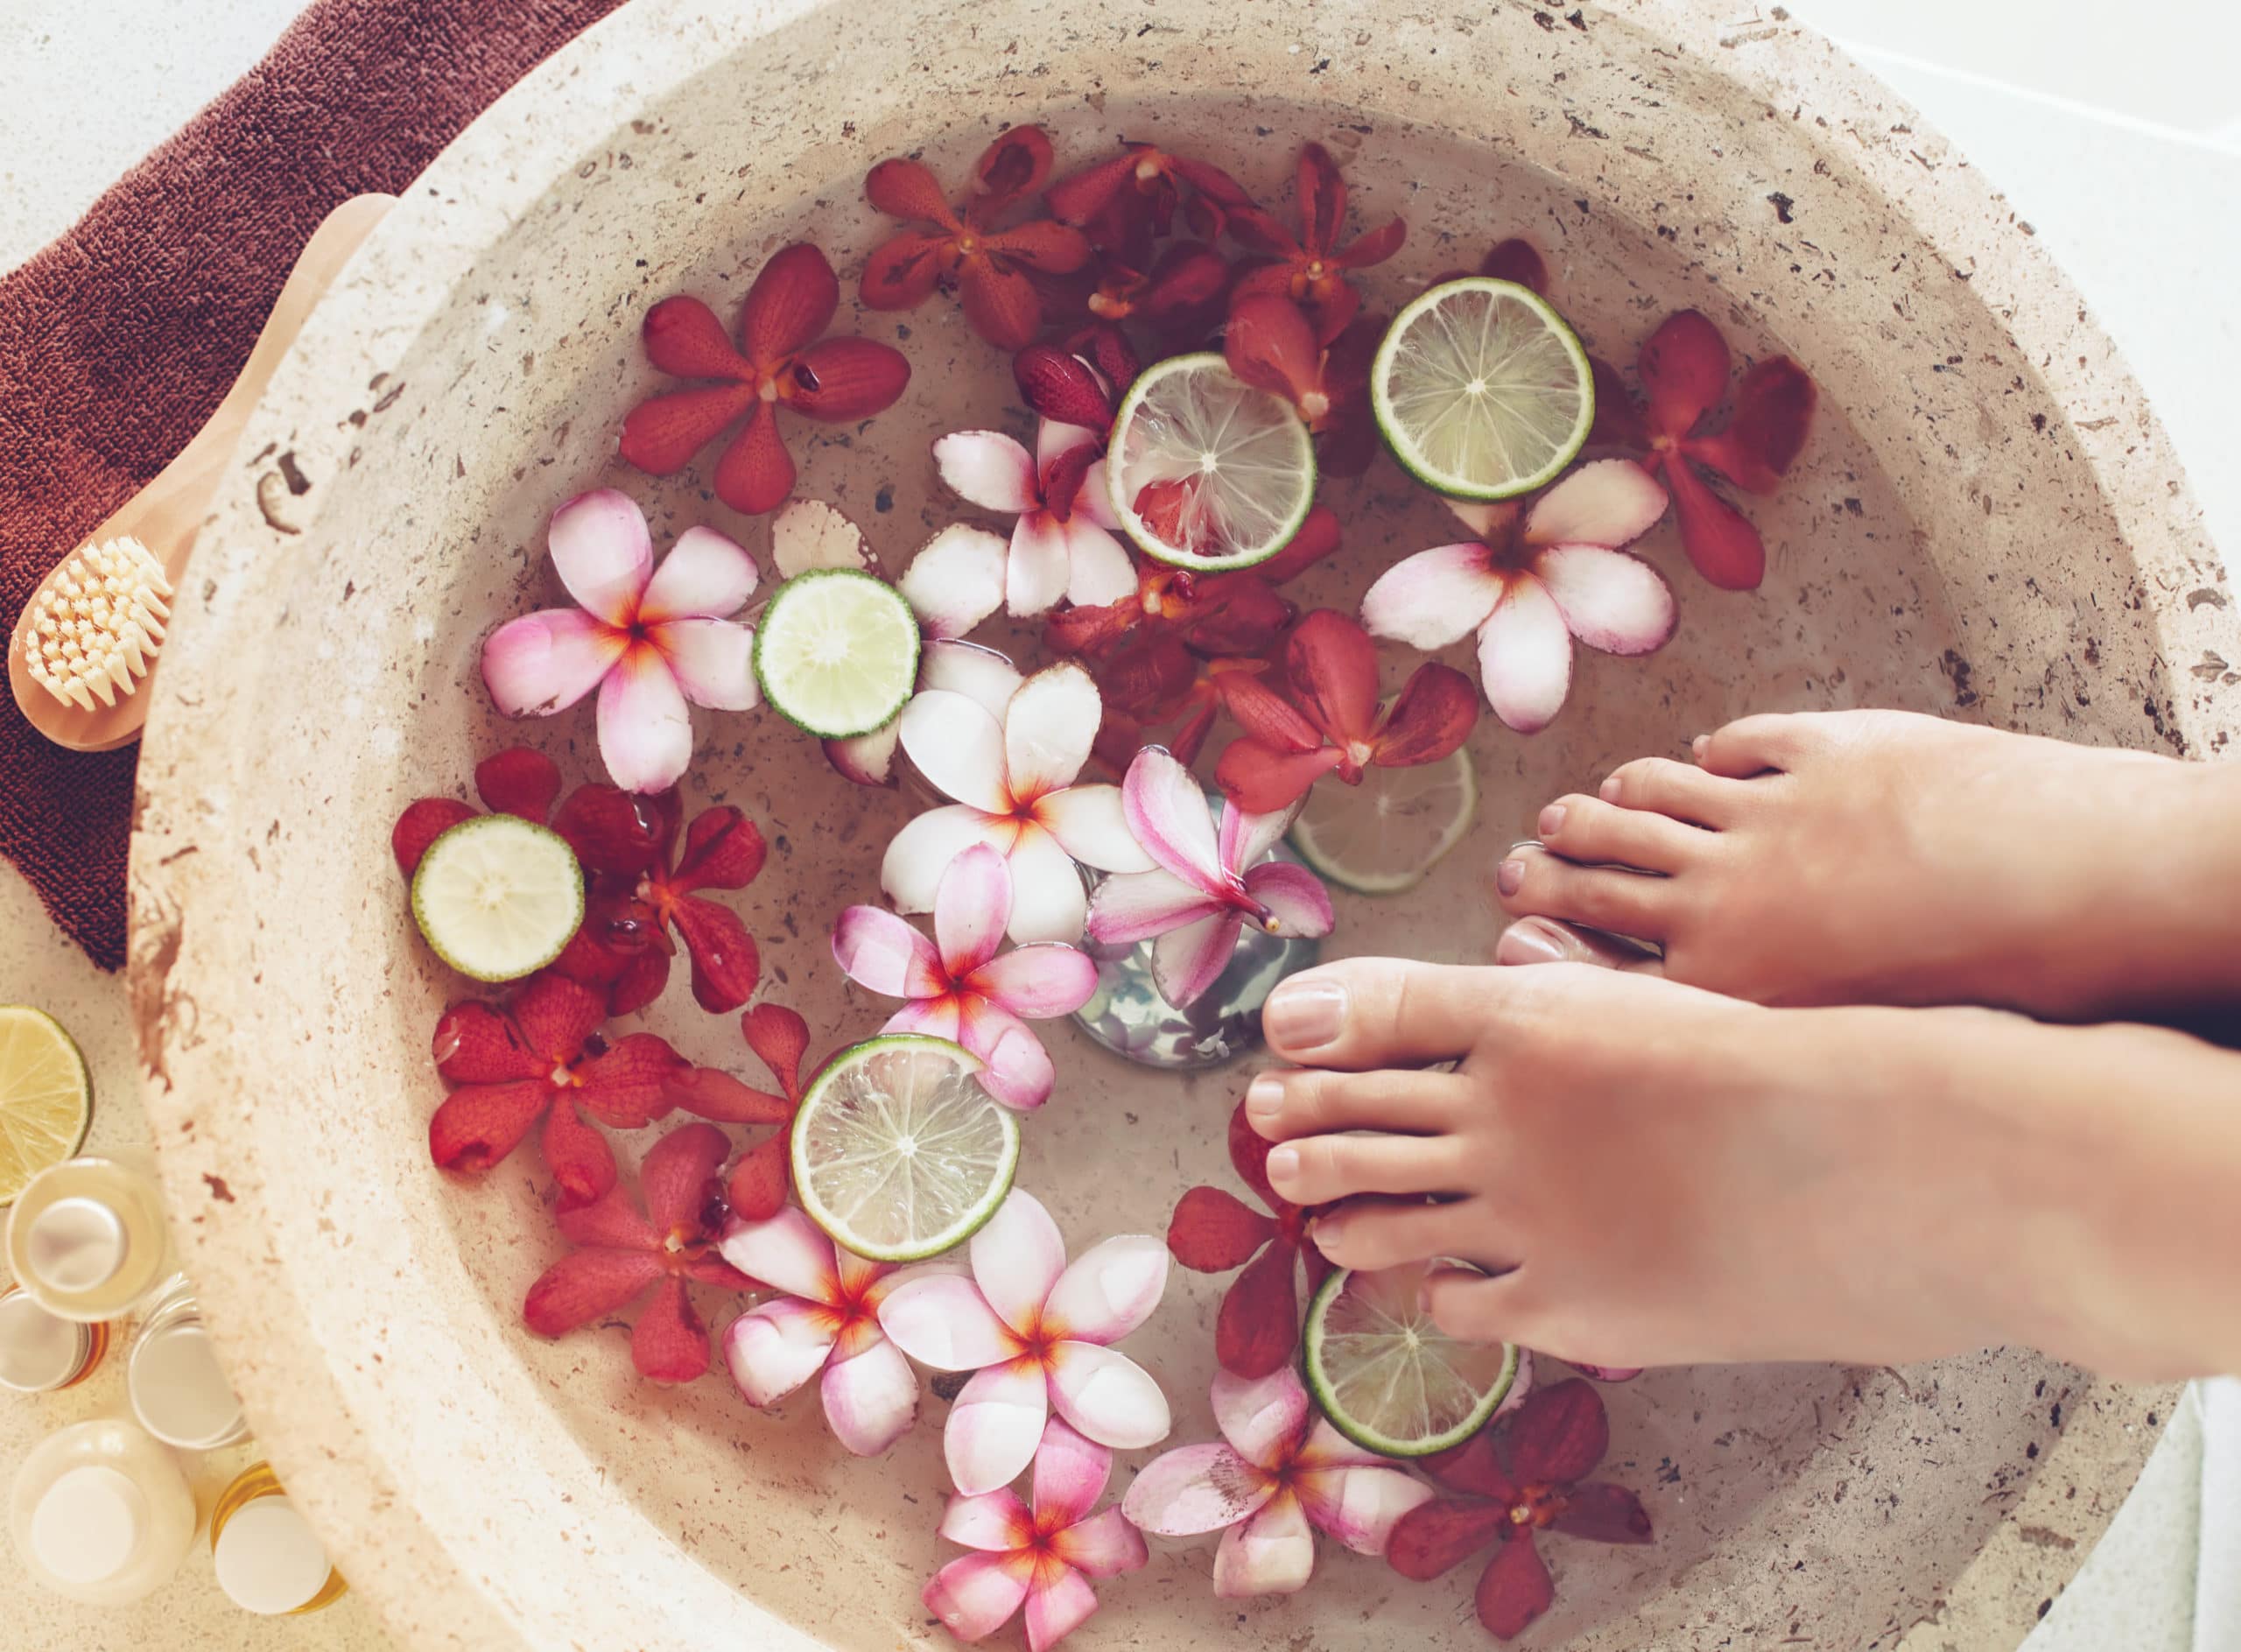 Foot bath in bowl with lime and tropical flowers, spa pedicure treatment, top view